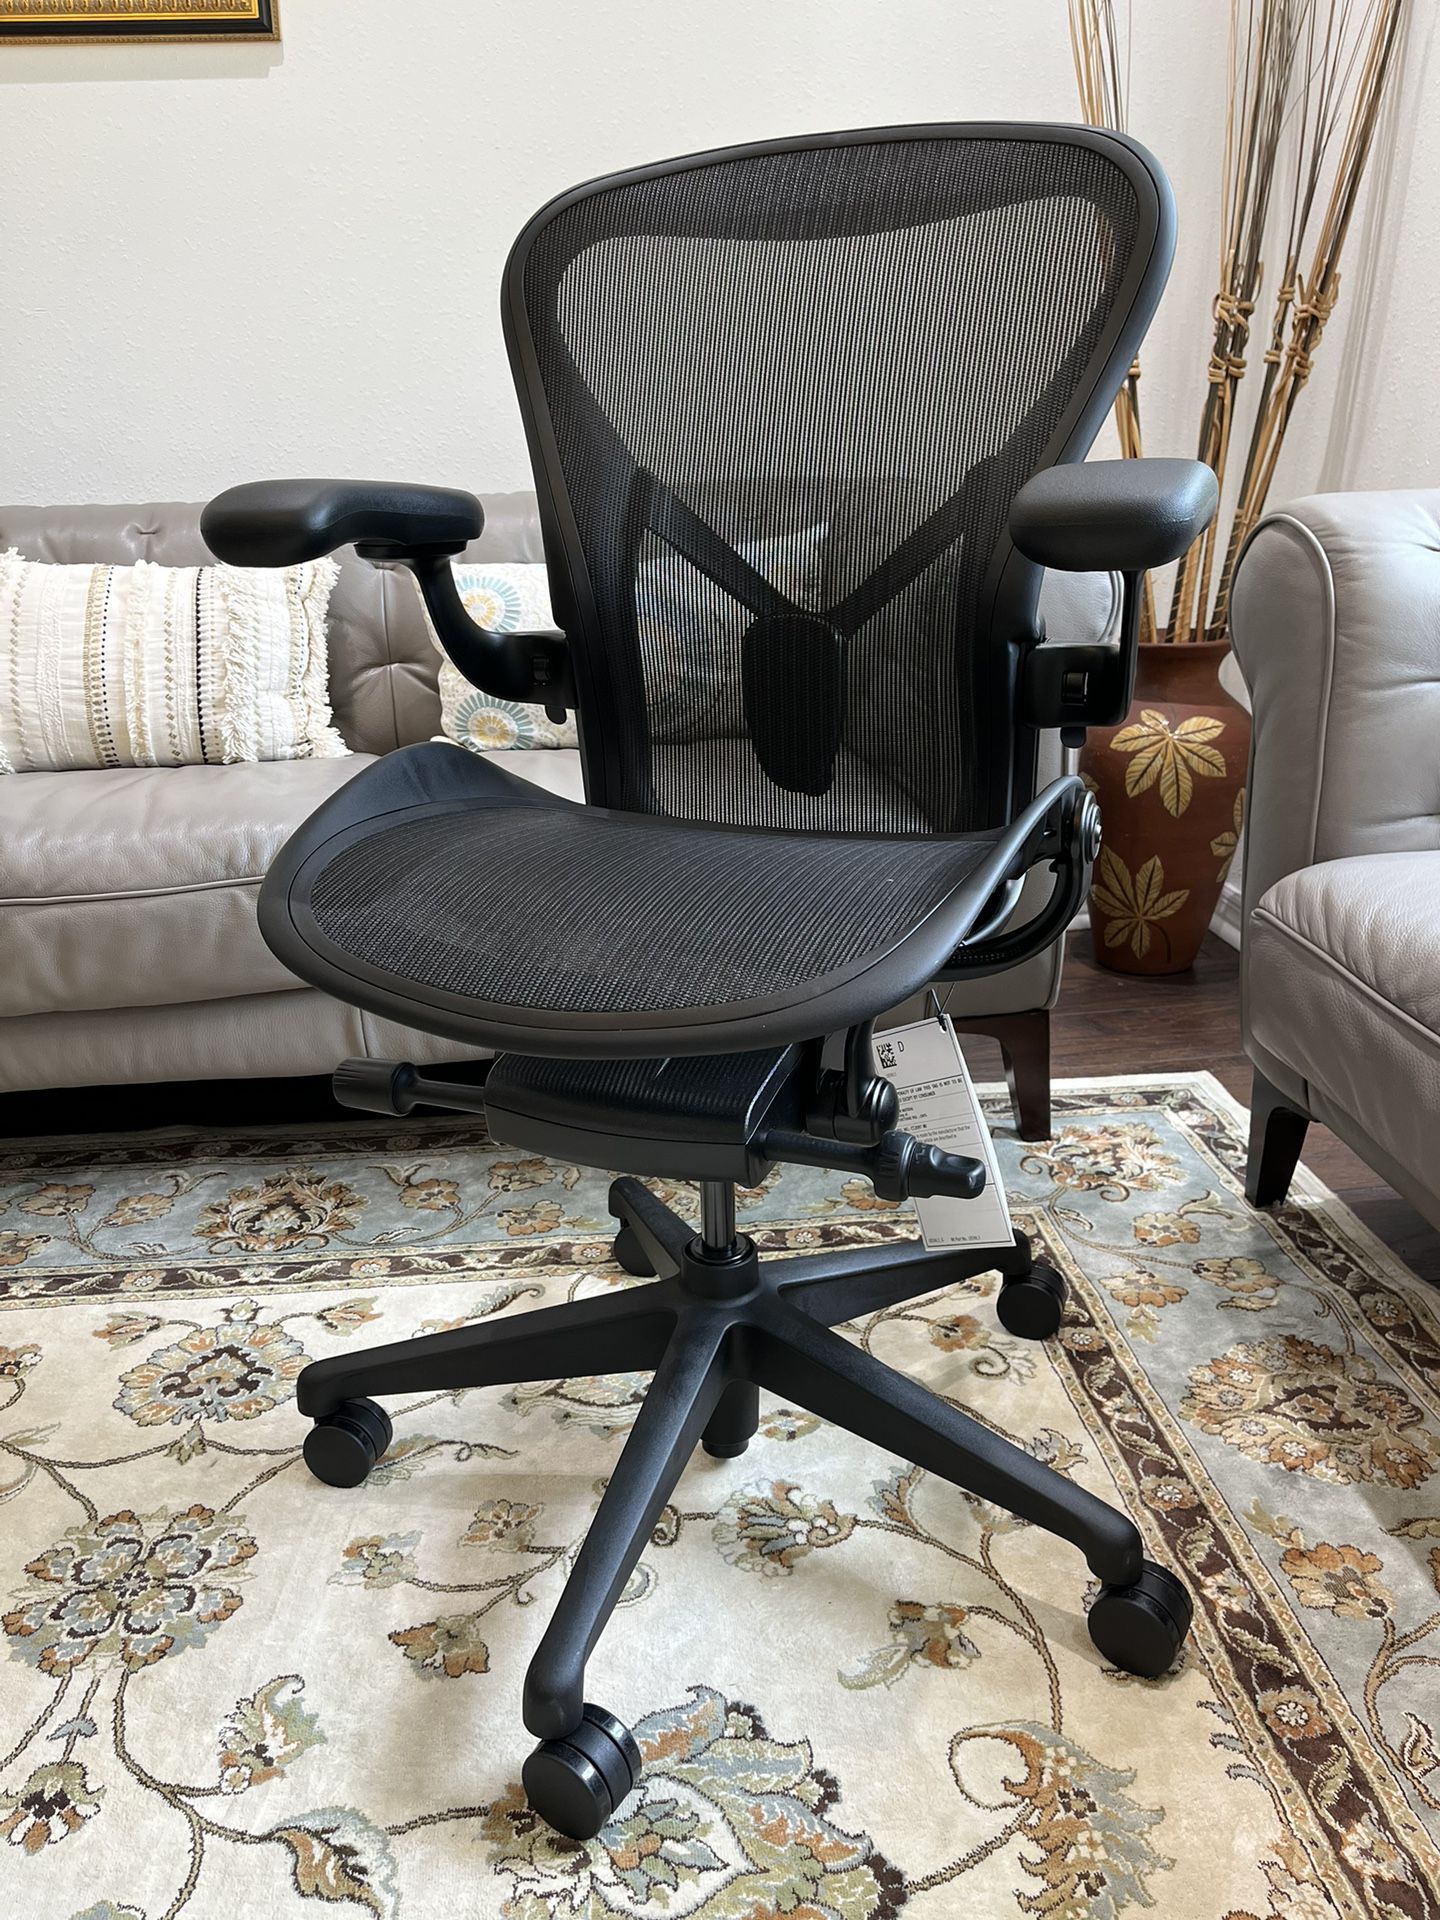 Herman Miller Aeron Remastered medium V2 (two dots) Size B Executive desk Office Chair in Gaming Black Onyx frame color. Brand new condition with full